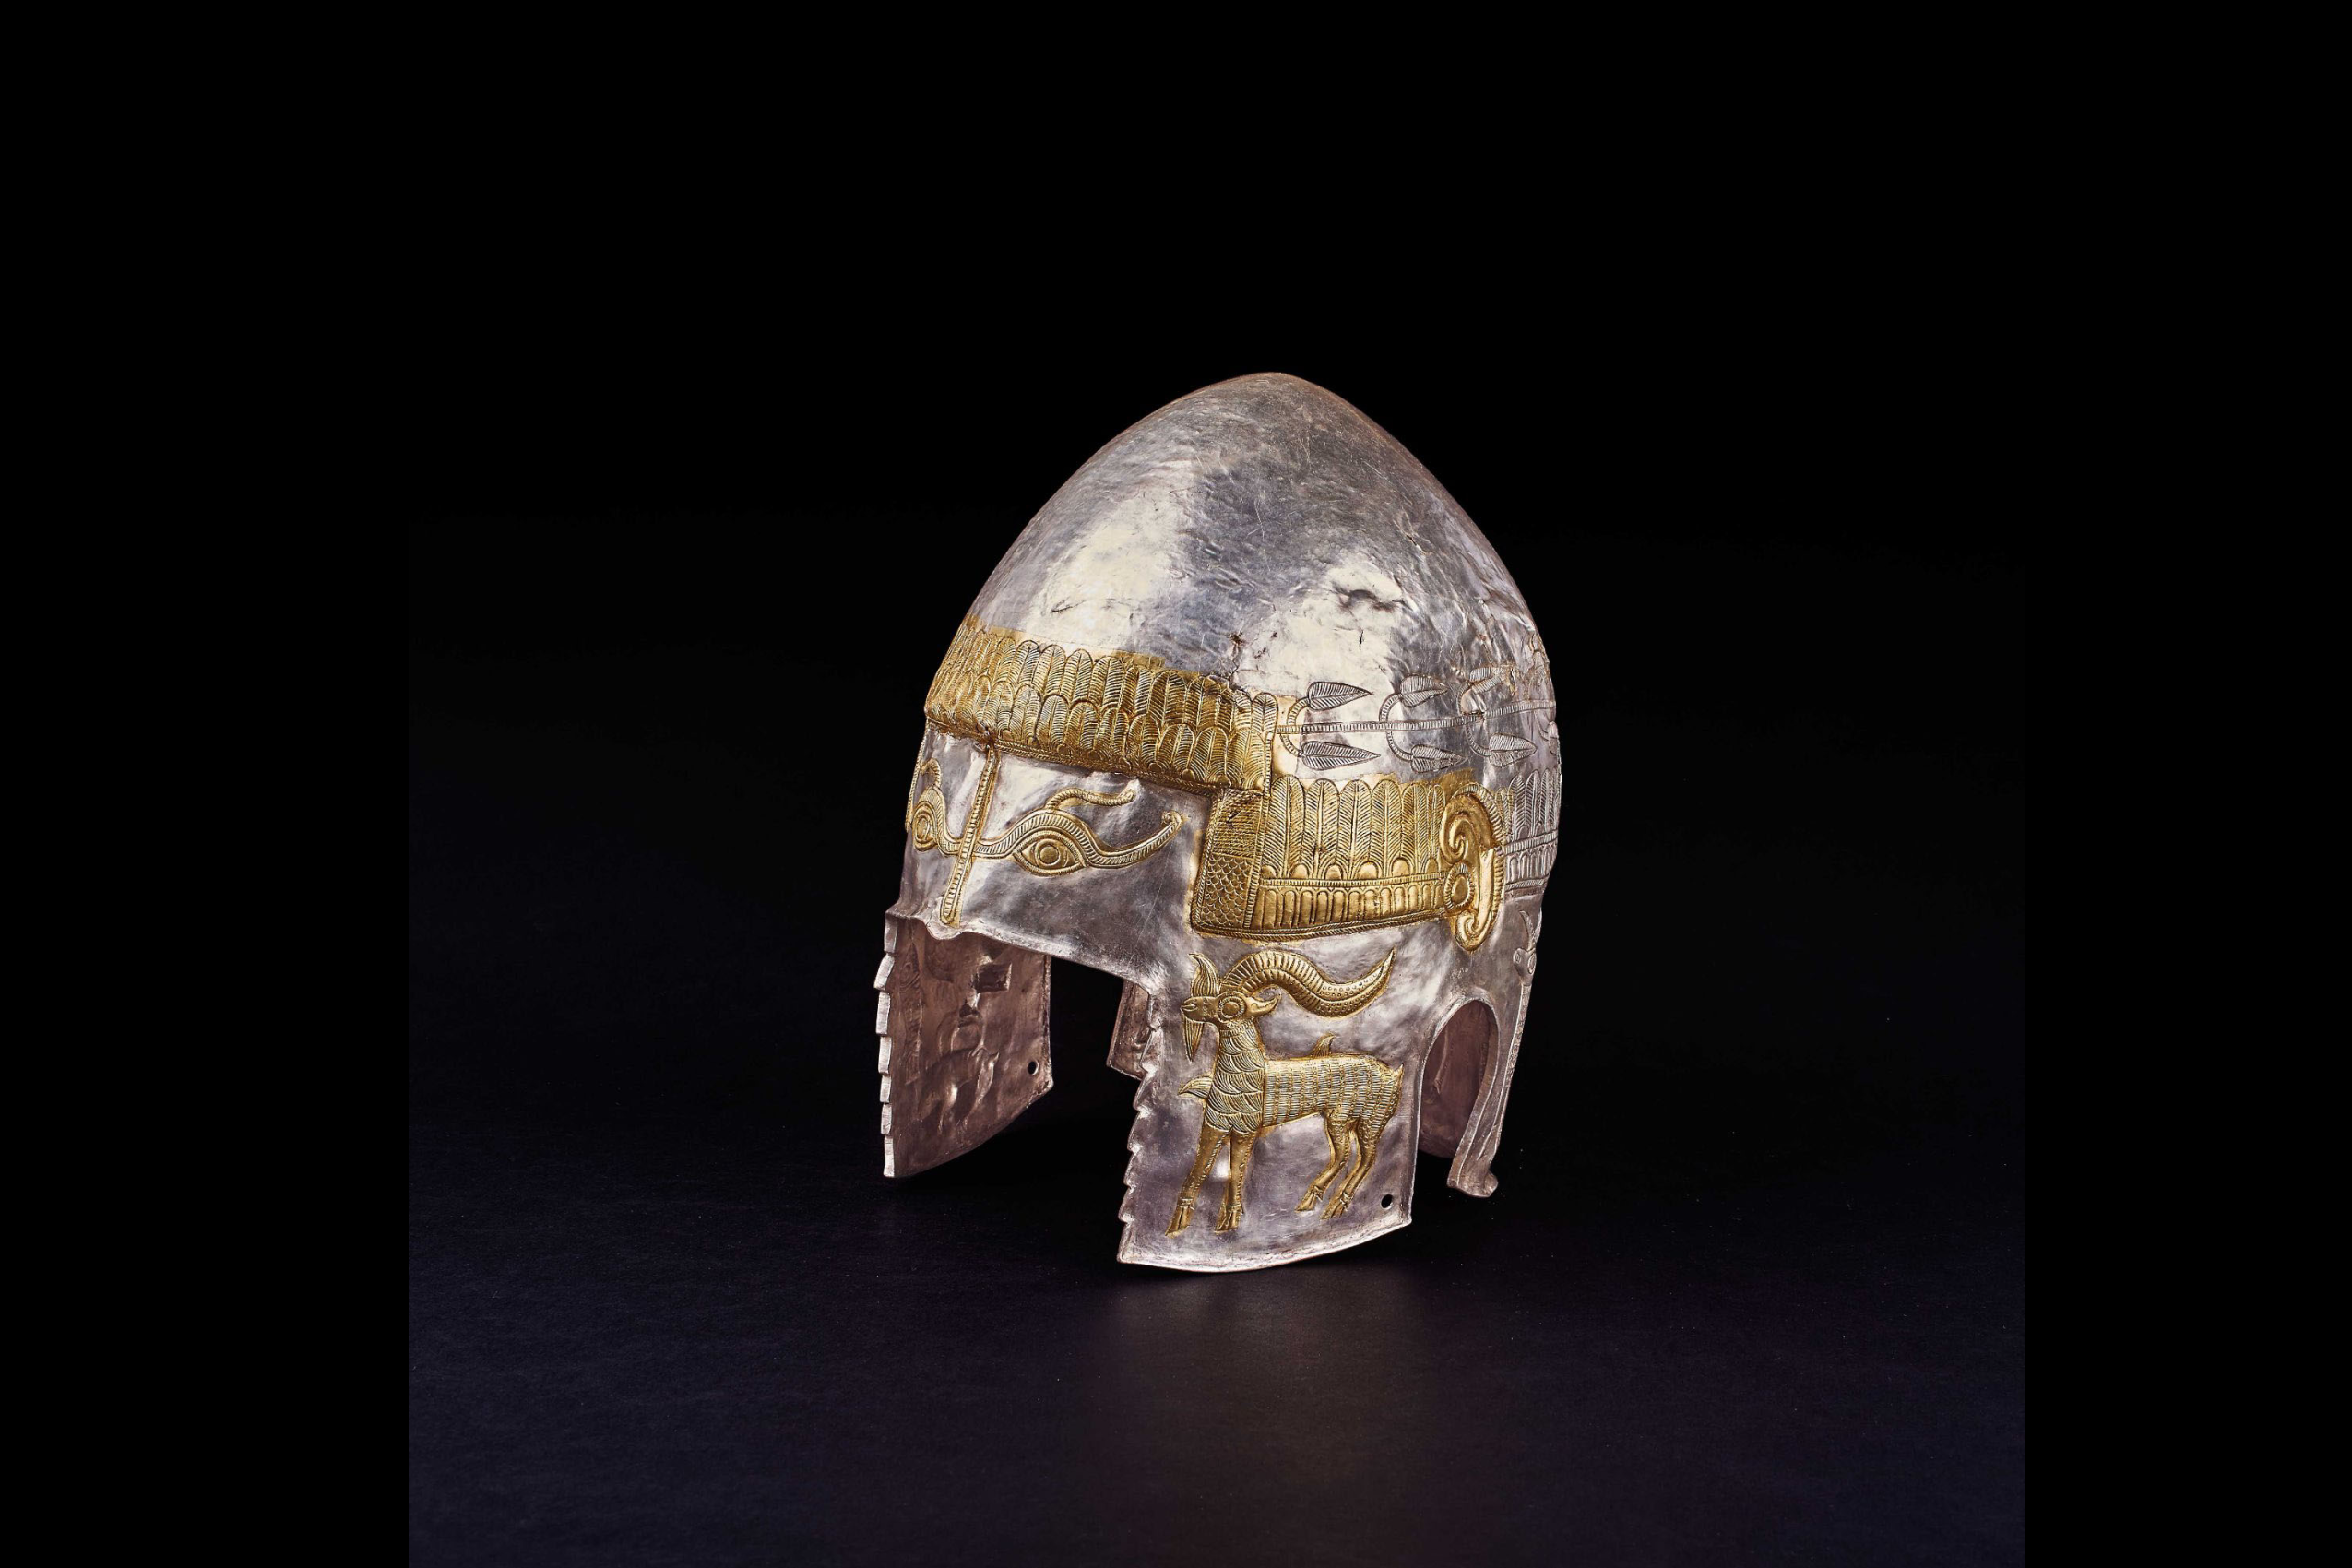 A gold and silver helmet